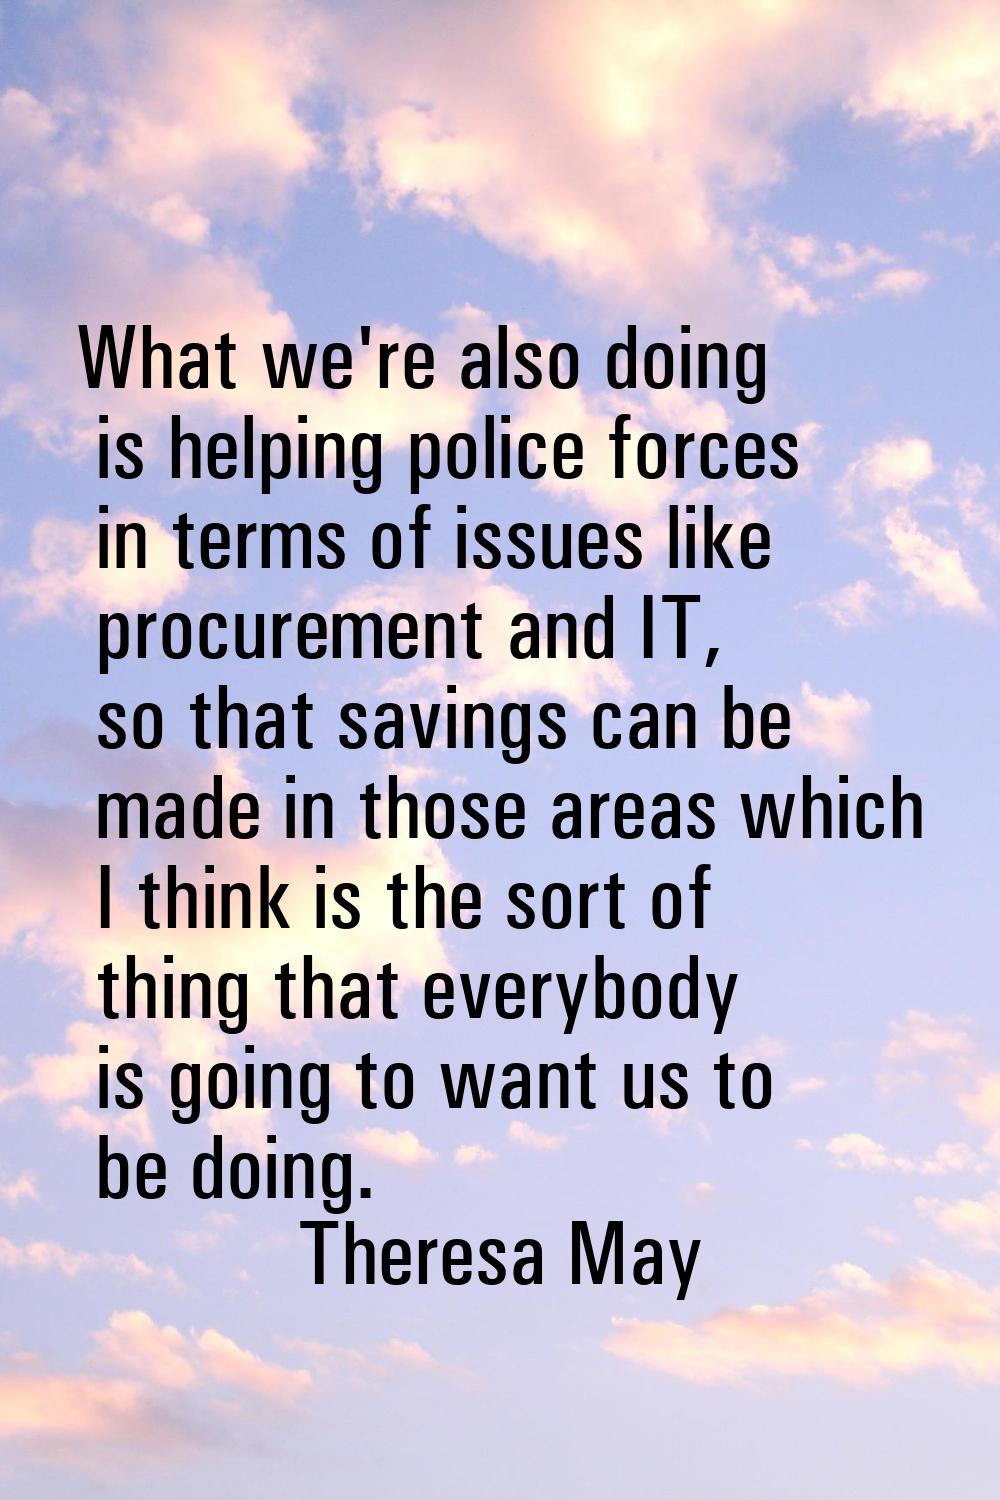 What we're also doing is helping police forces in terms of issues like procurement and IT, so that 